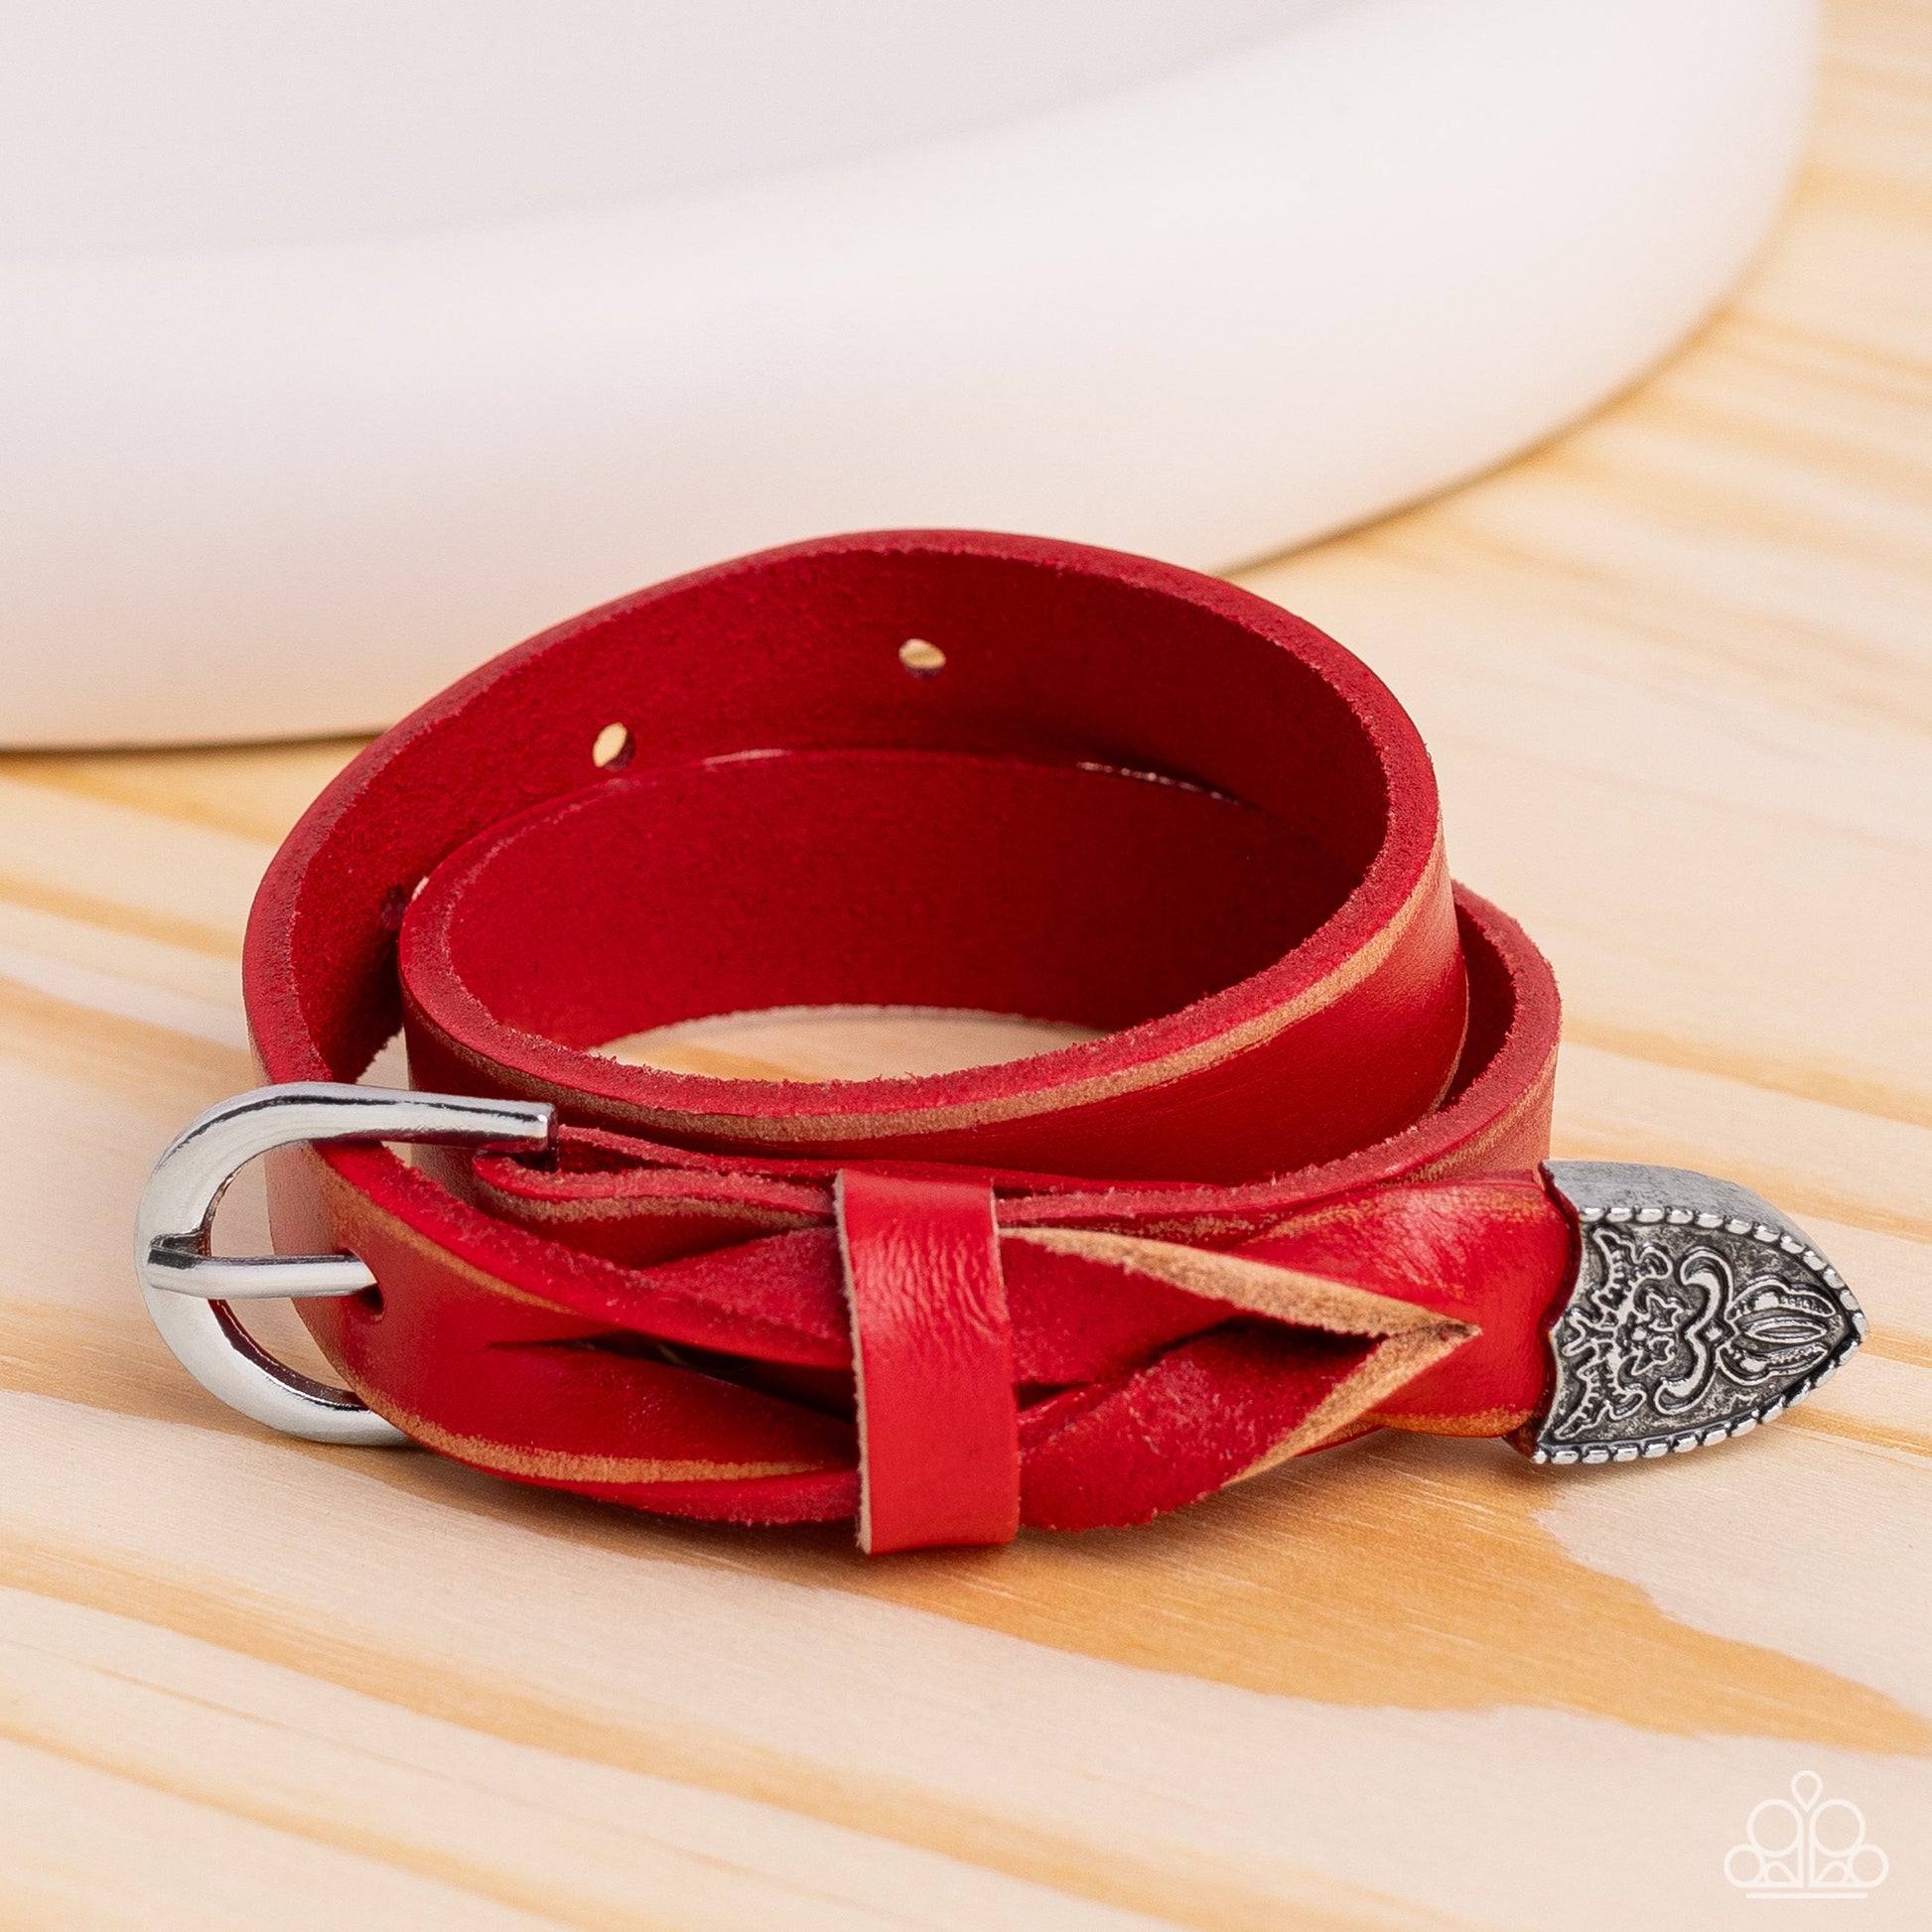 Paparazzi Accessories - Coat of Arms - Red Braceleloofeaturing a weathered finish, a red leather band loops around the wrist in a belt loop fashion. Featured at the end of the loop, the leather braids into a silver cap fitting, embossed with a coat of arms style filigree for an urban statement. Features an adjustable belt loop closure.  Featured inside The Preview at Made for More!  Sold as one individual bracelet.